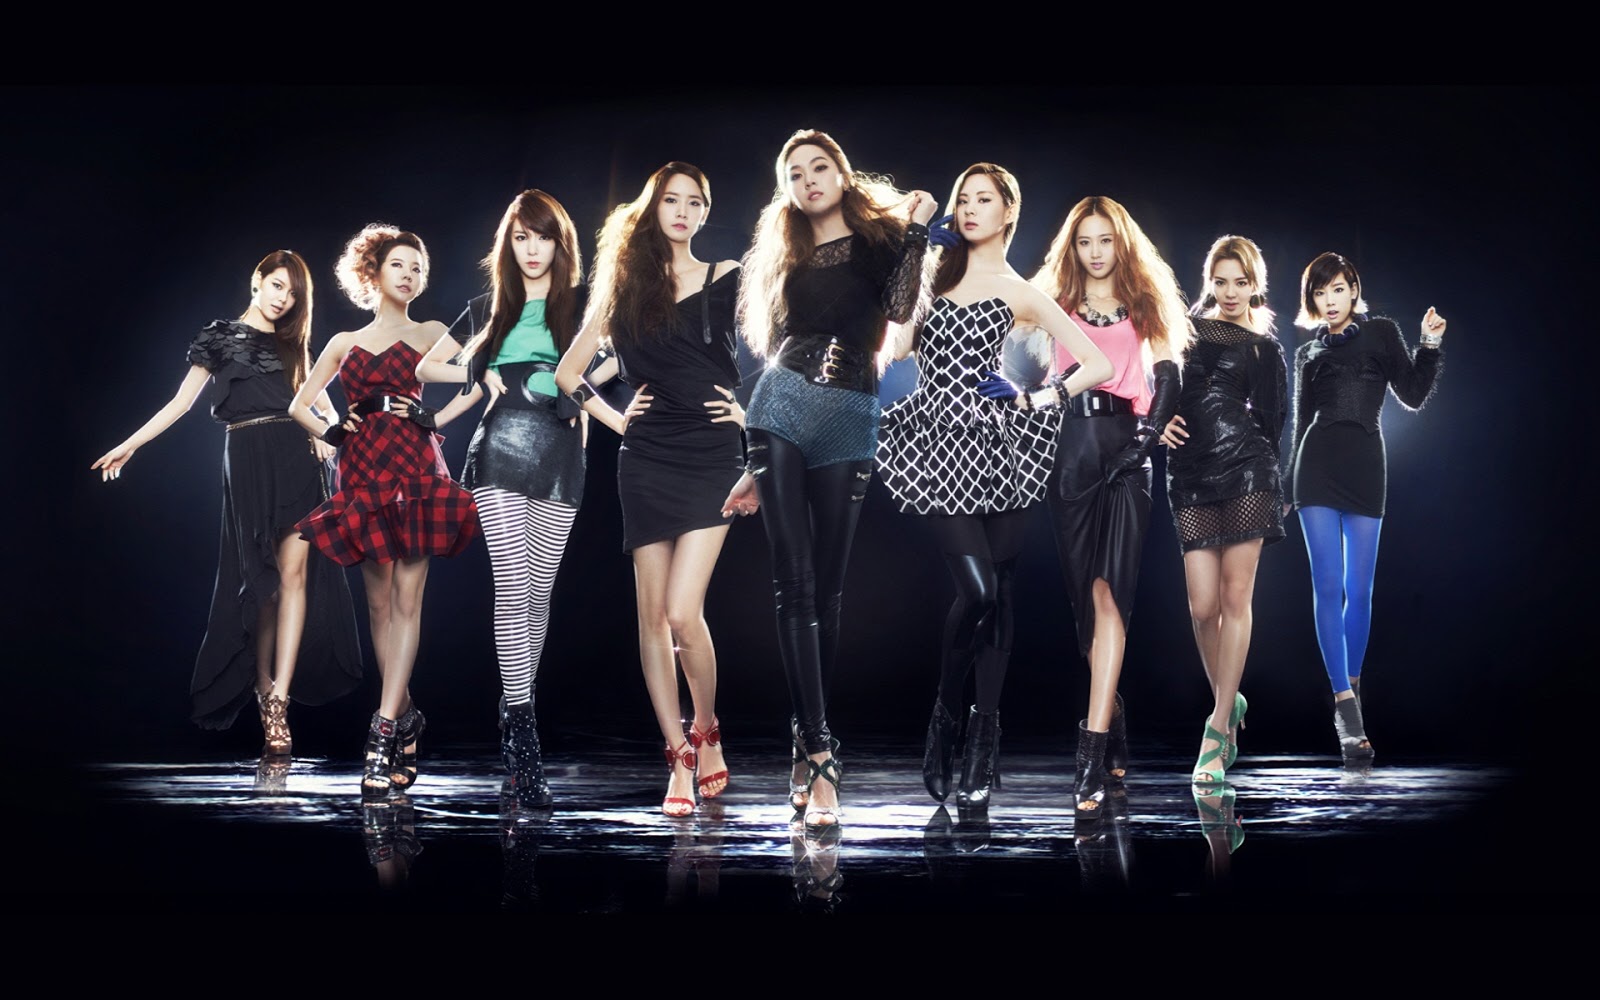 🔥 Free Download Snsd Girls Generation Wallpaper Hd [1600x1000] For Your Desktop Mobile And Tablet